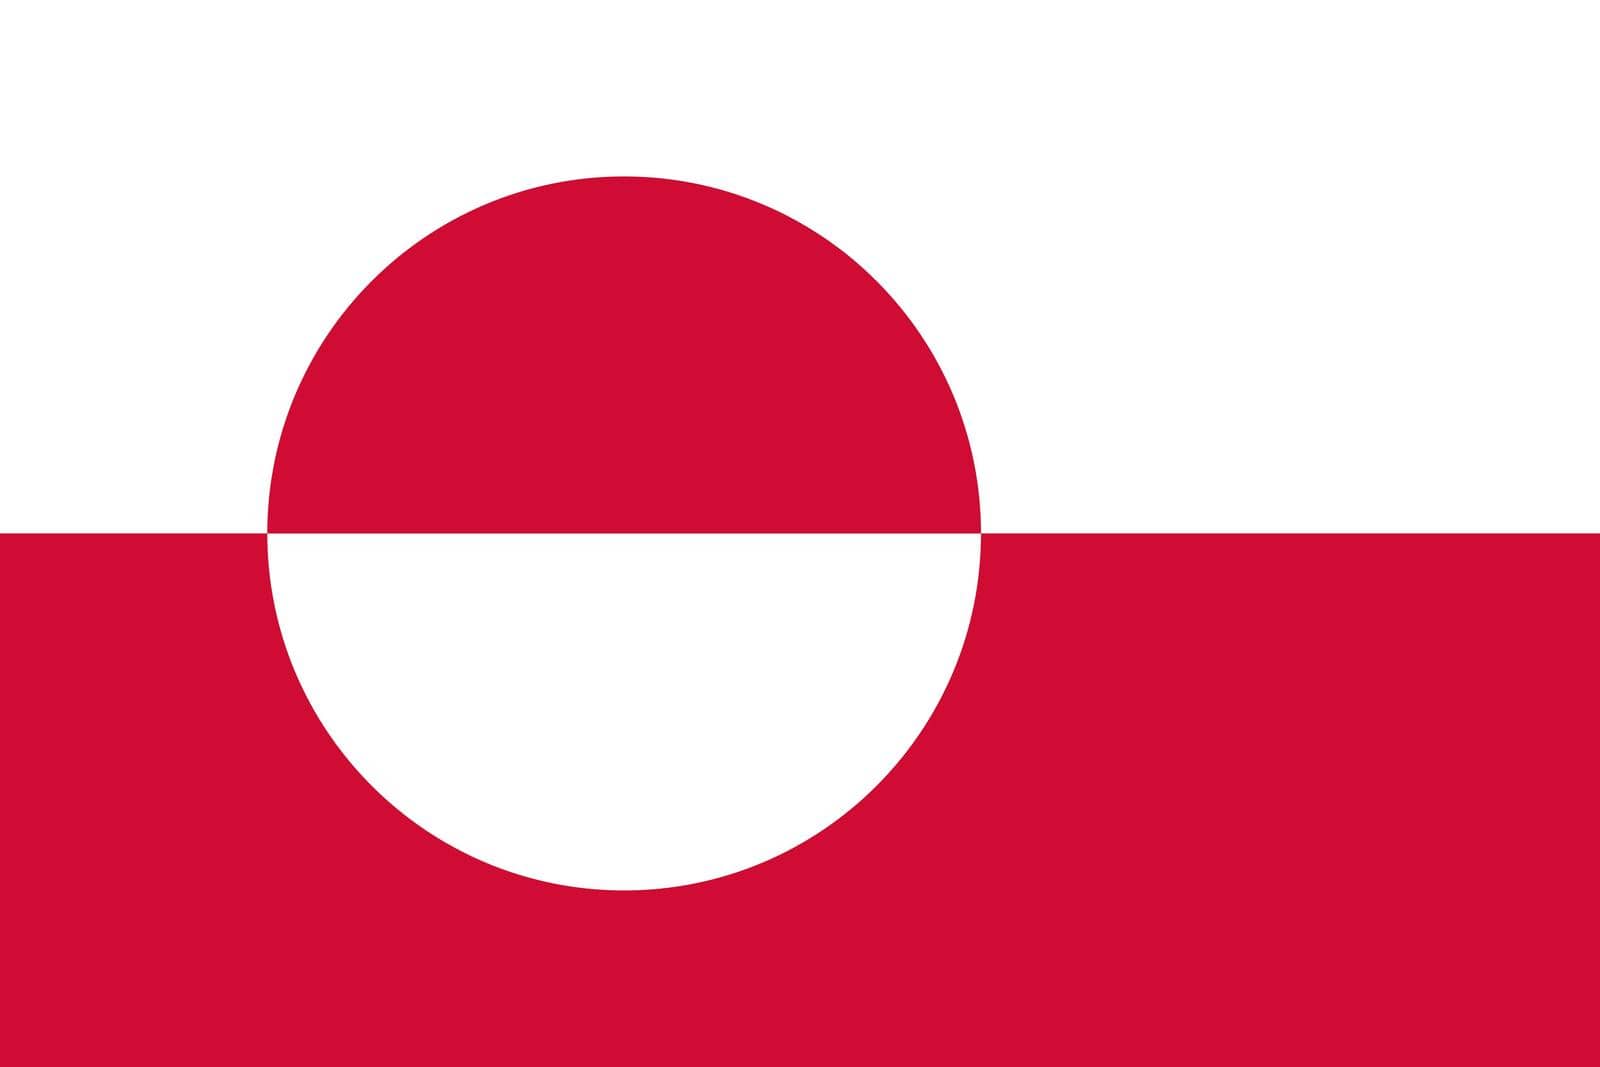 Greenland flag in real proportions and colors, vector image